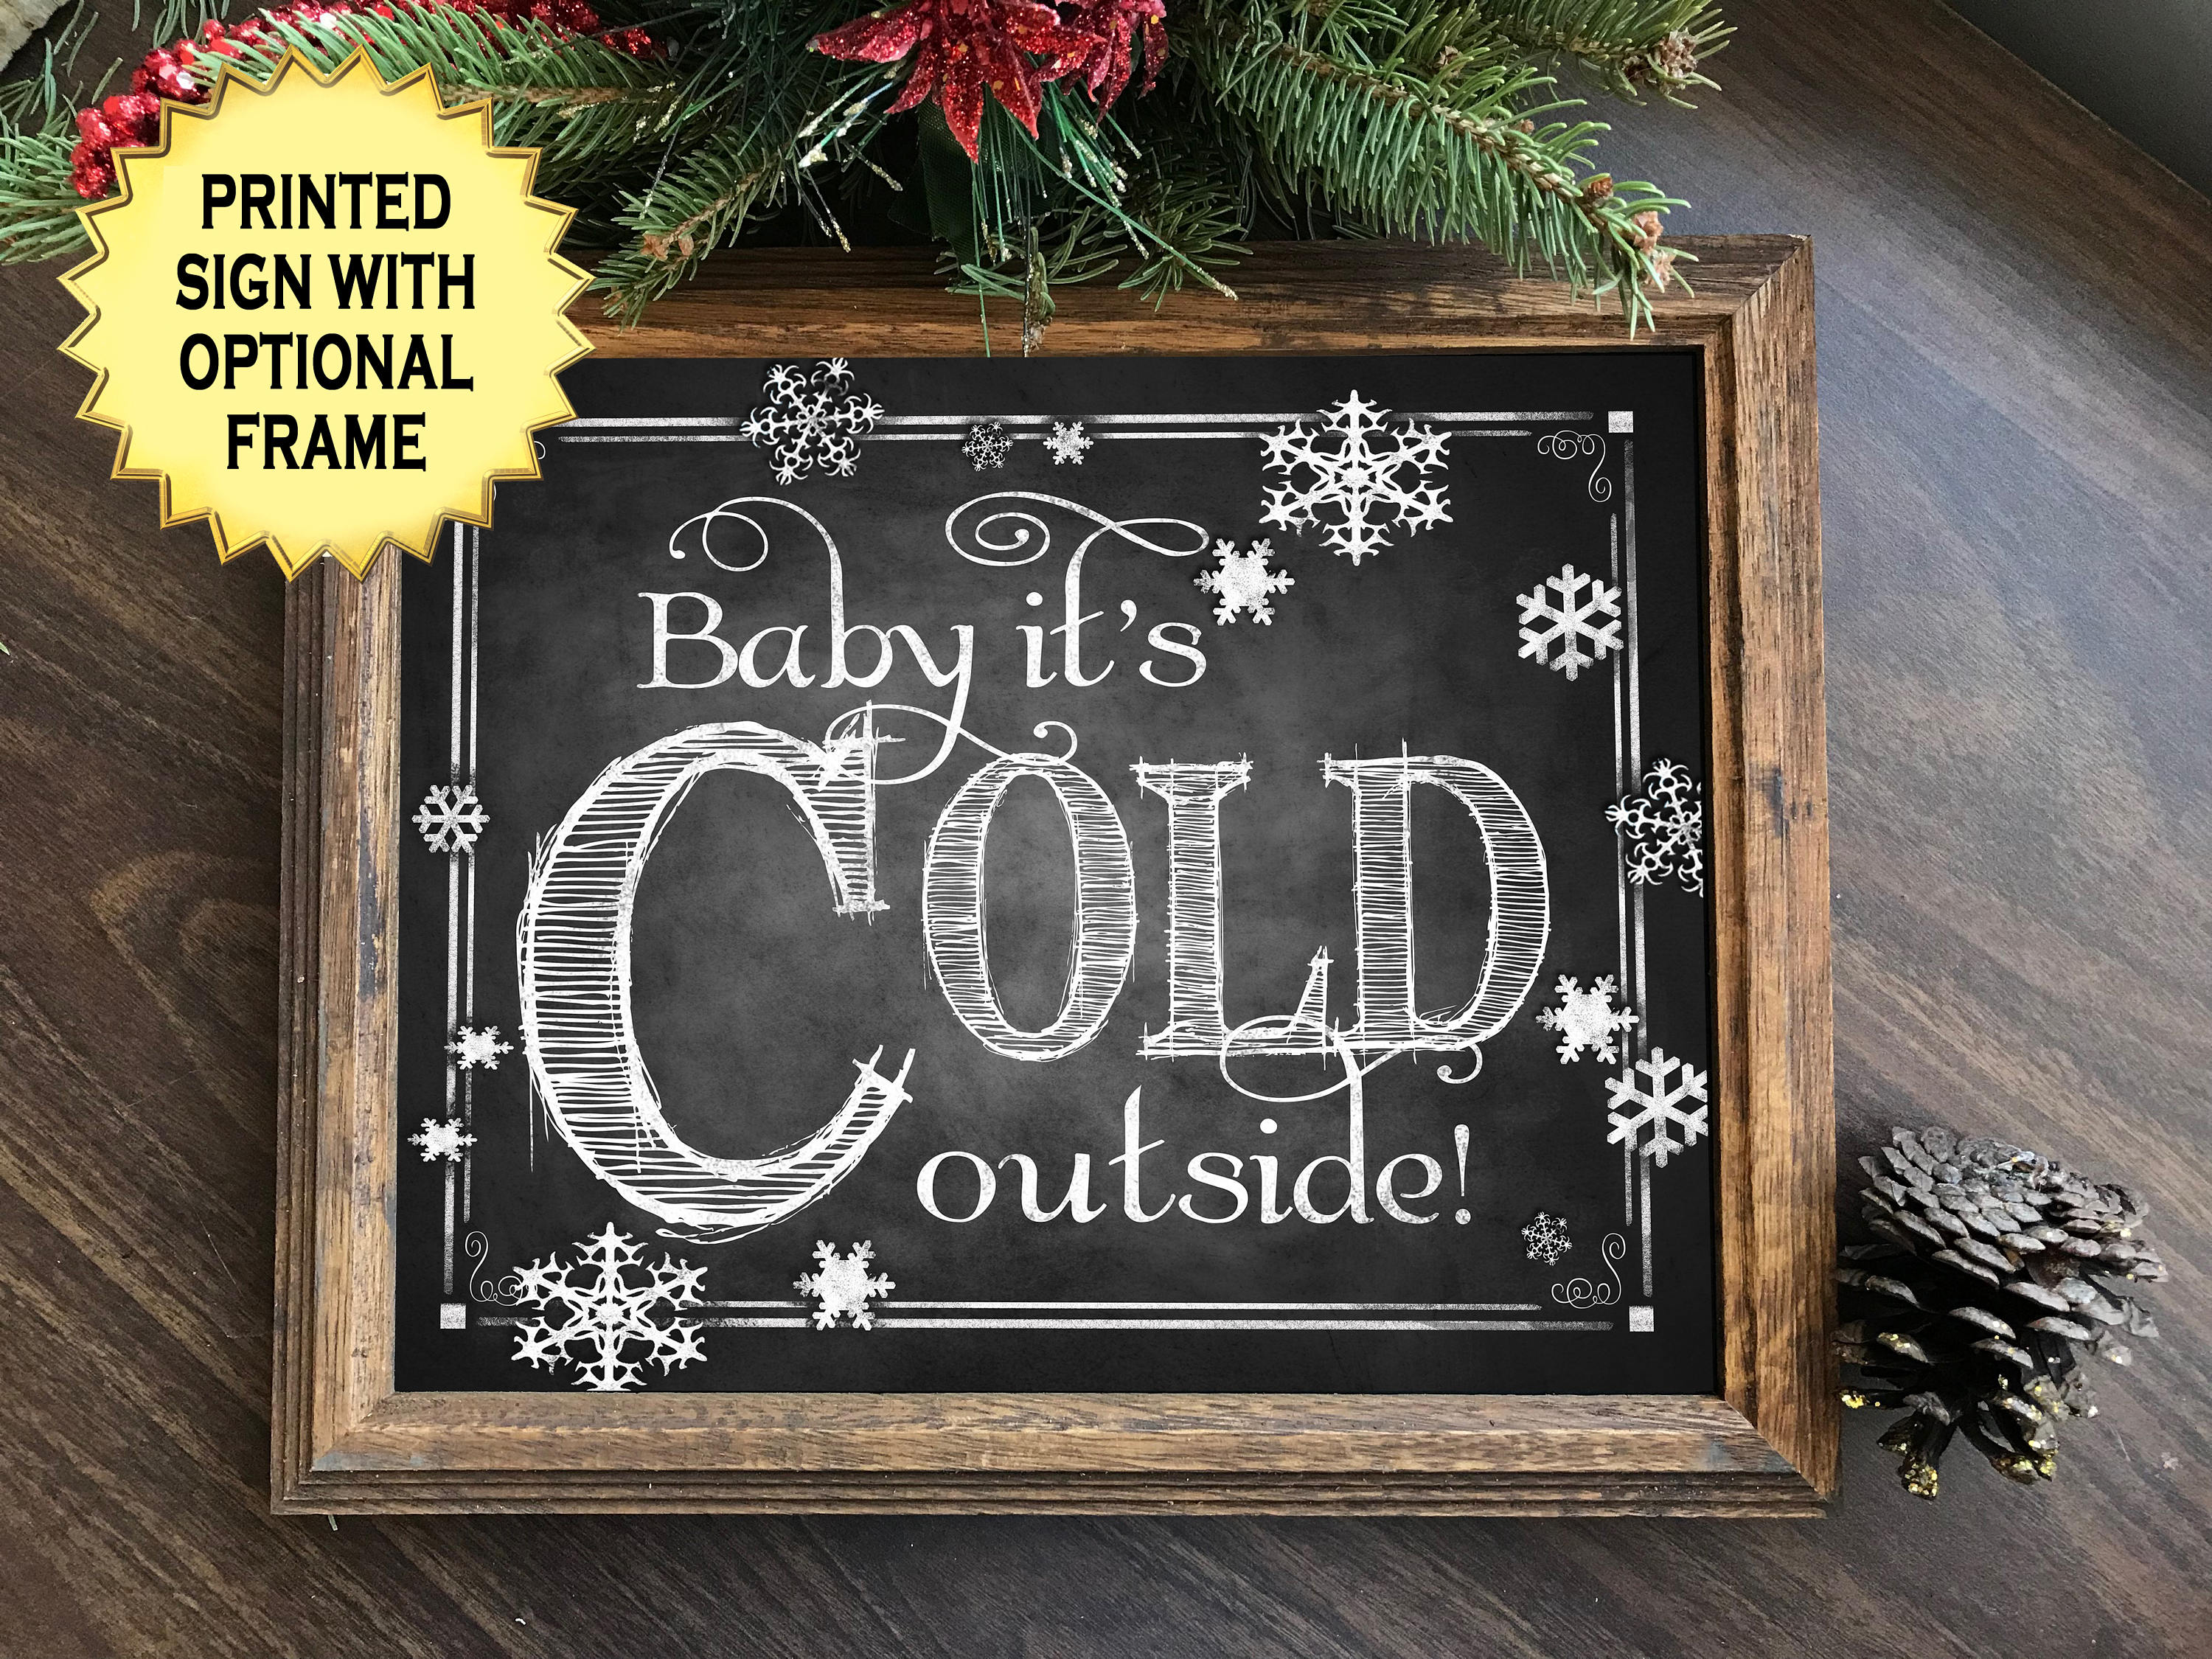 This charming Baby it's cold outside printed chalkboard sign looks lik...